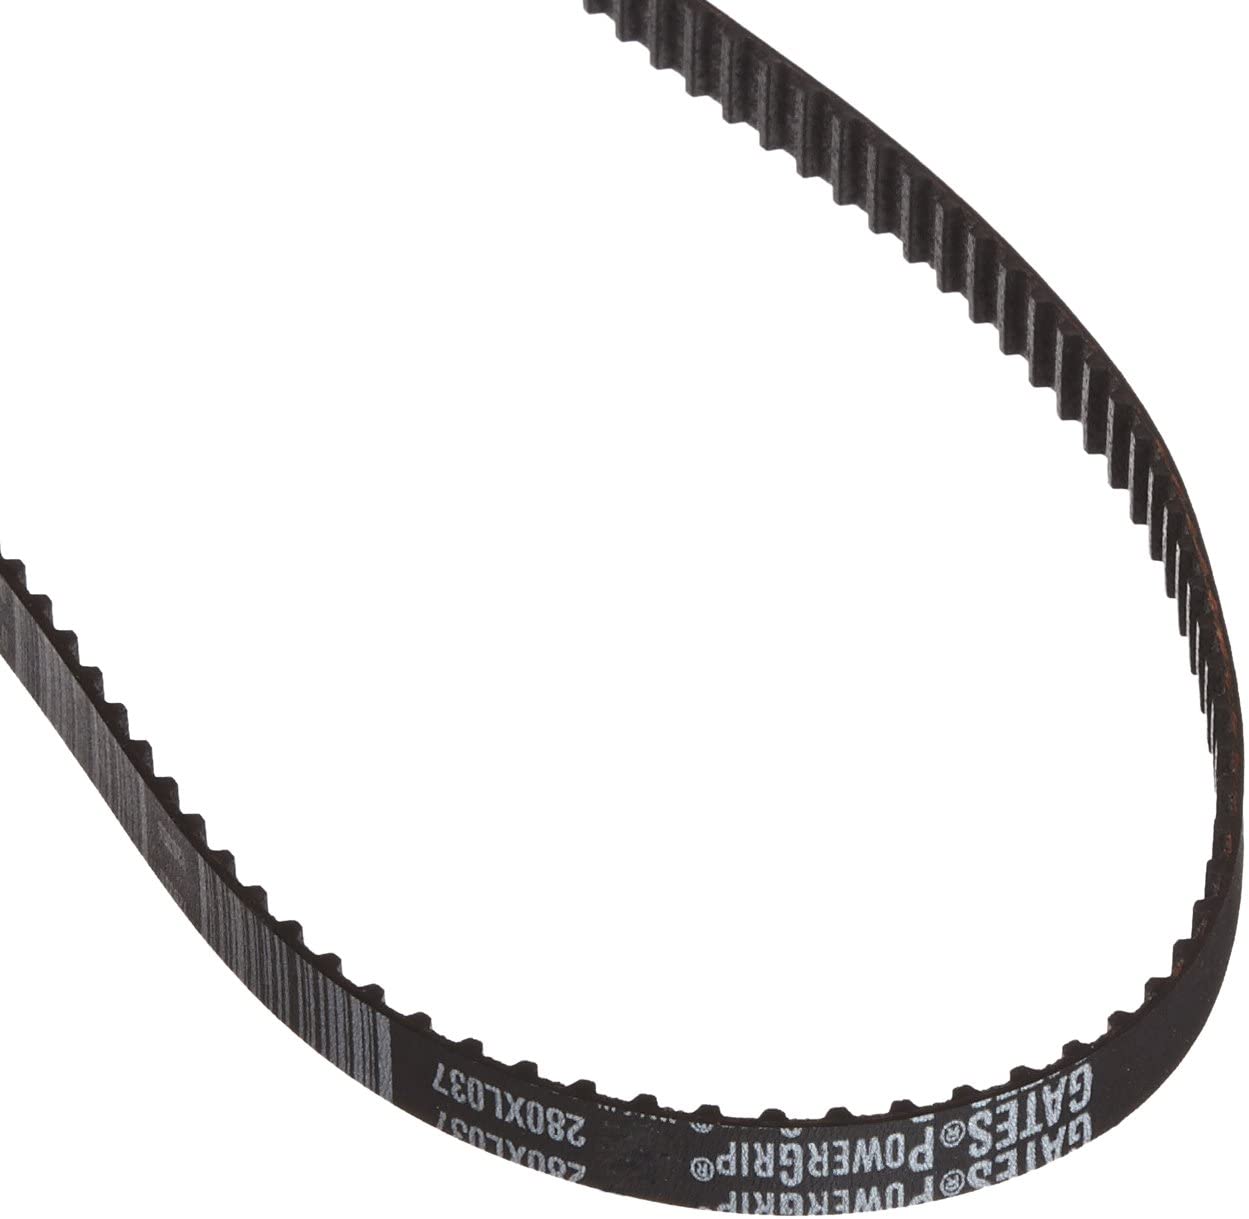 Timing Belt Opel 1.8Astra 180I/180E (OPE146-20FSD) at Modern Auto Parts!